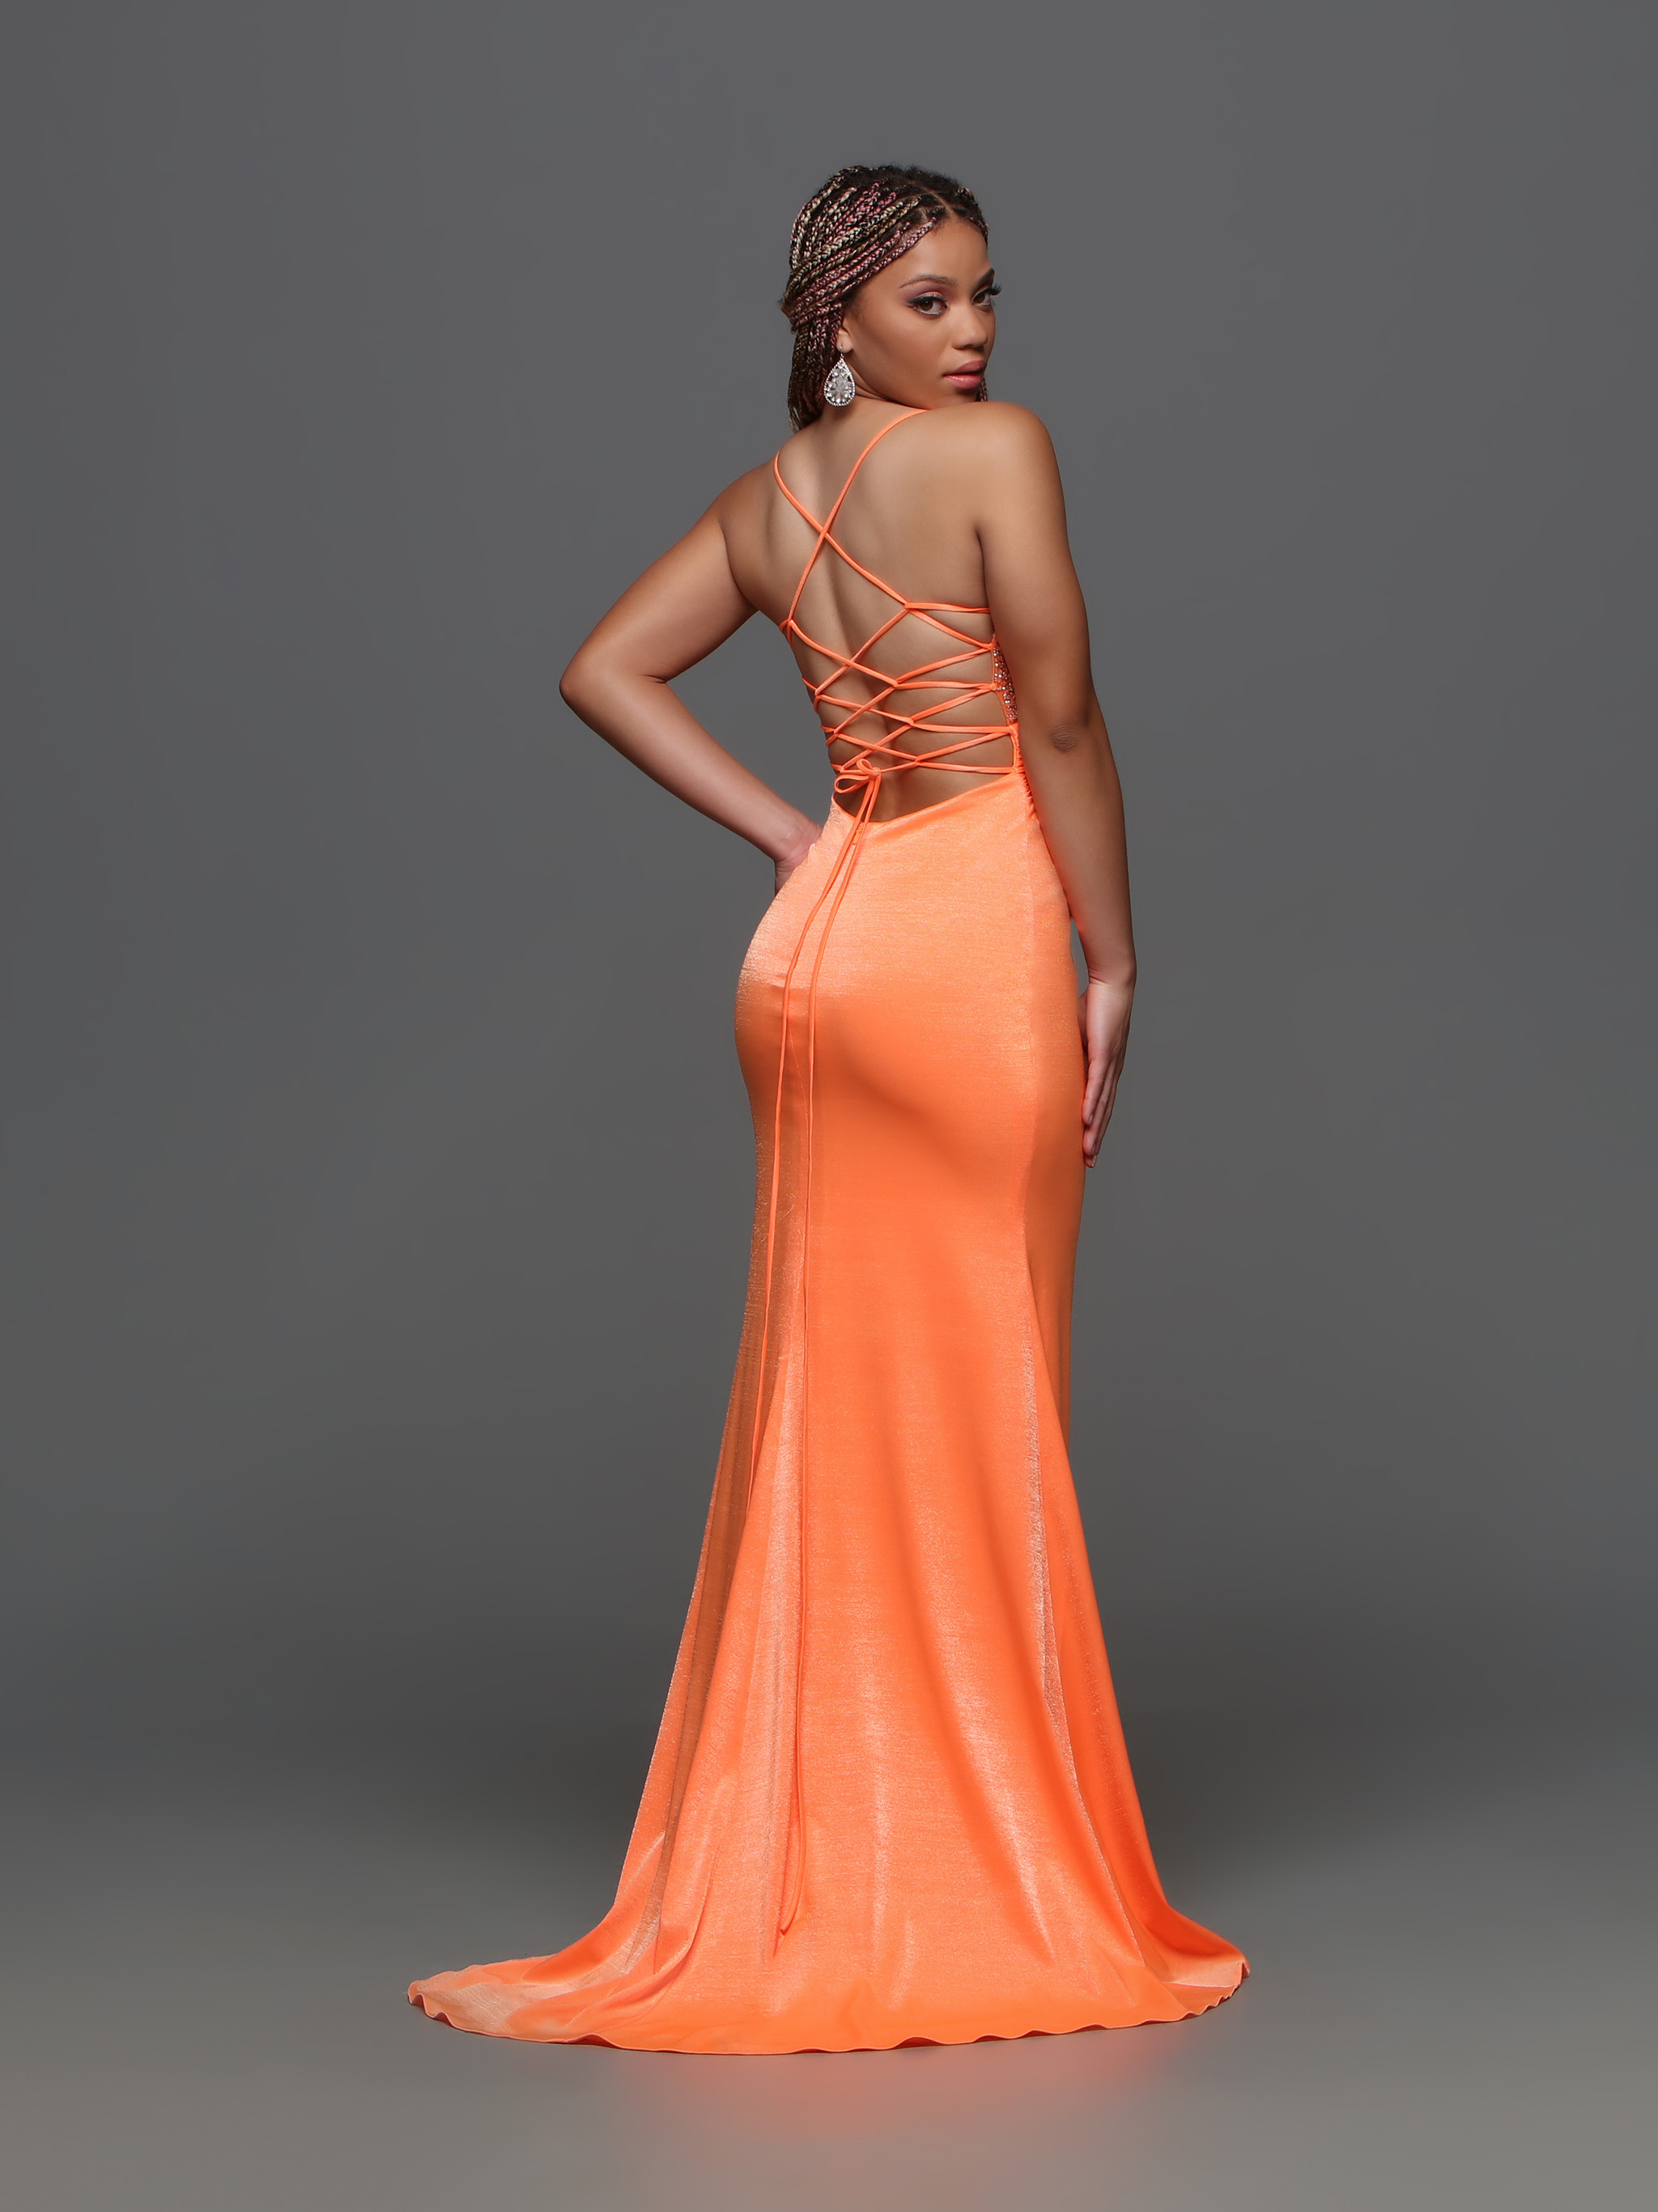 Image showing back view of style #72330